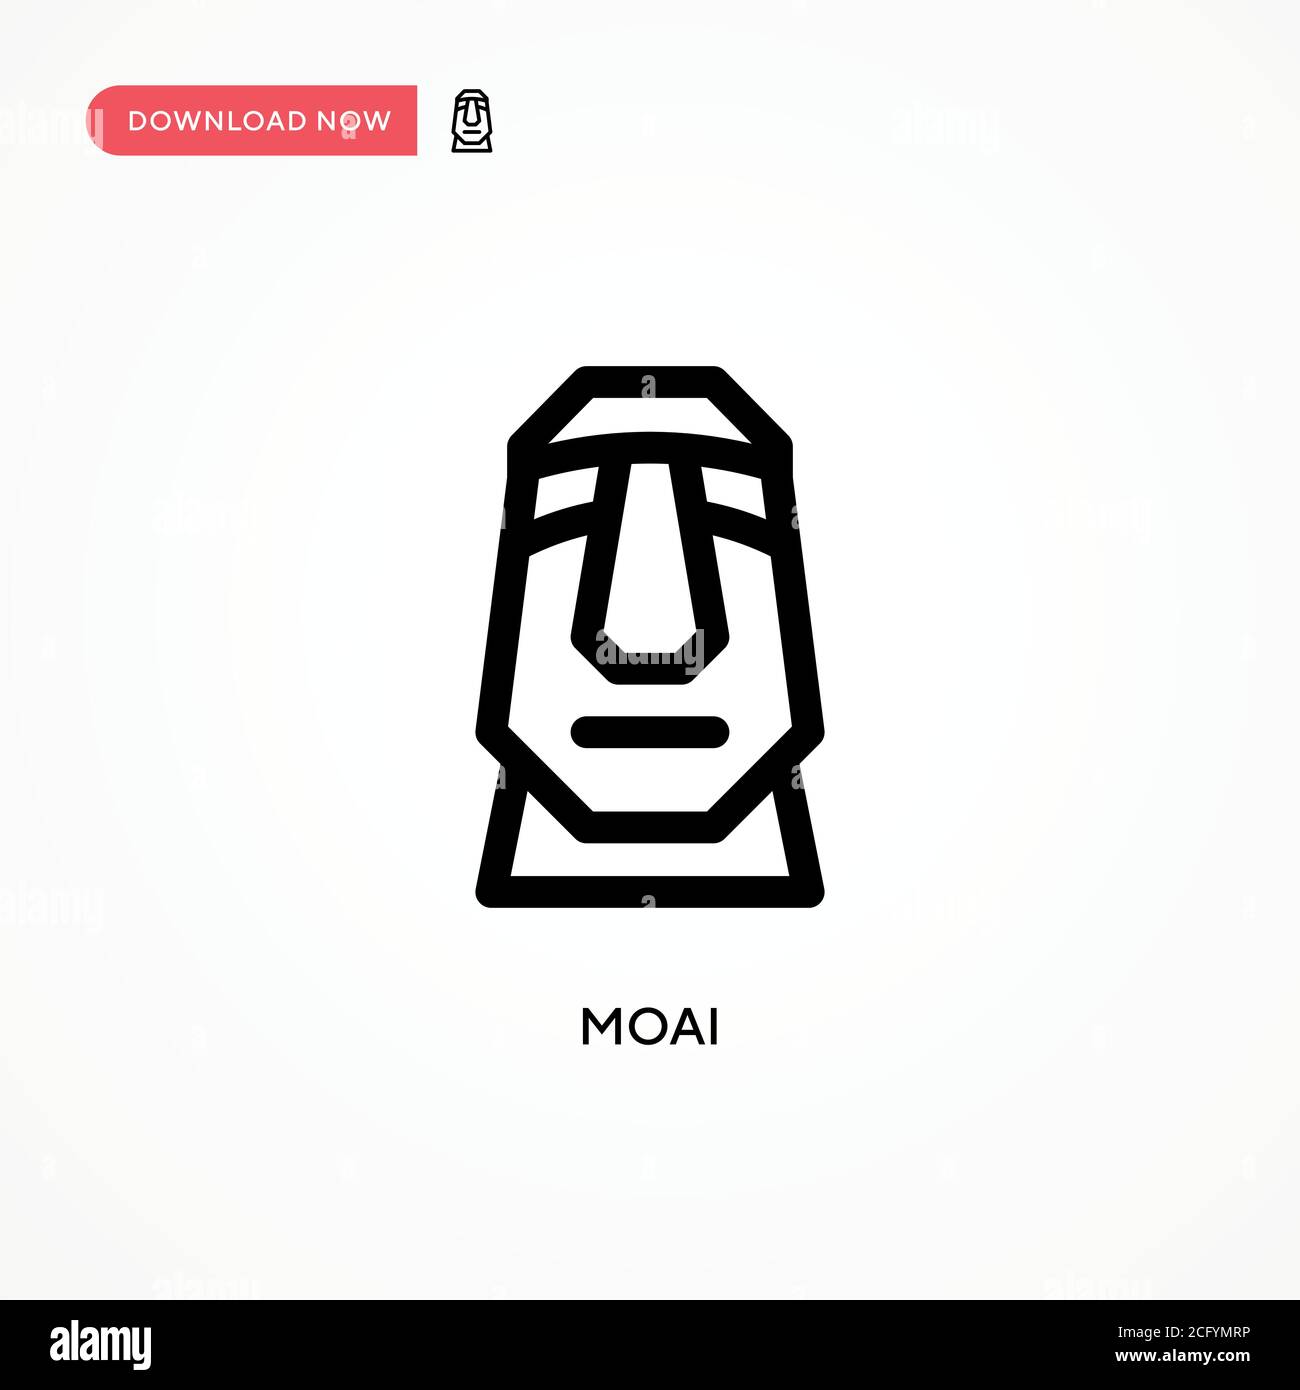 Moai Projects  Photos, videos, logos, illustrations and branding